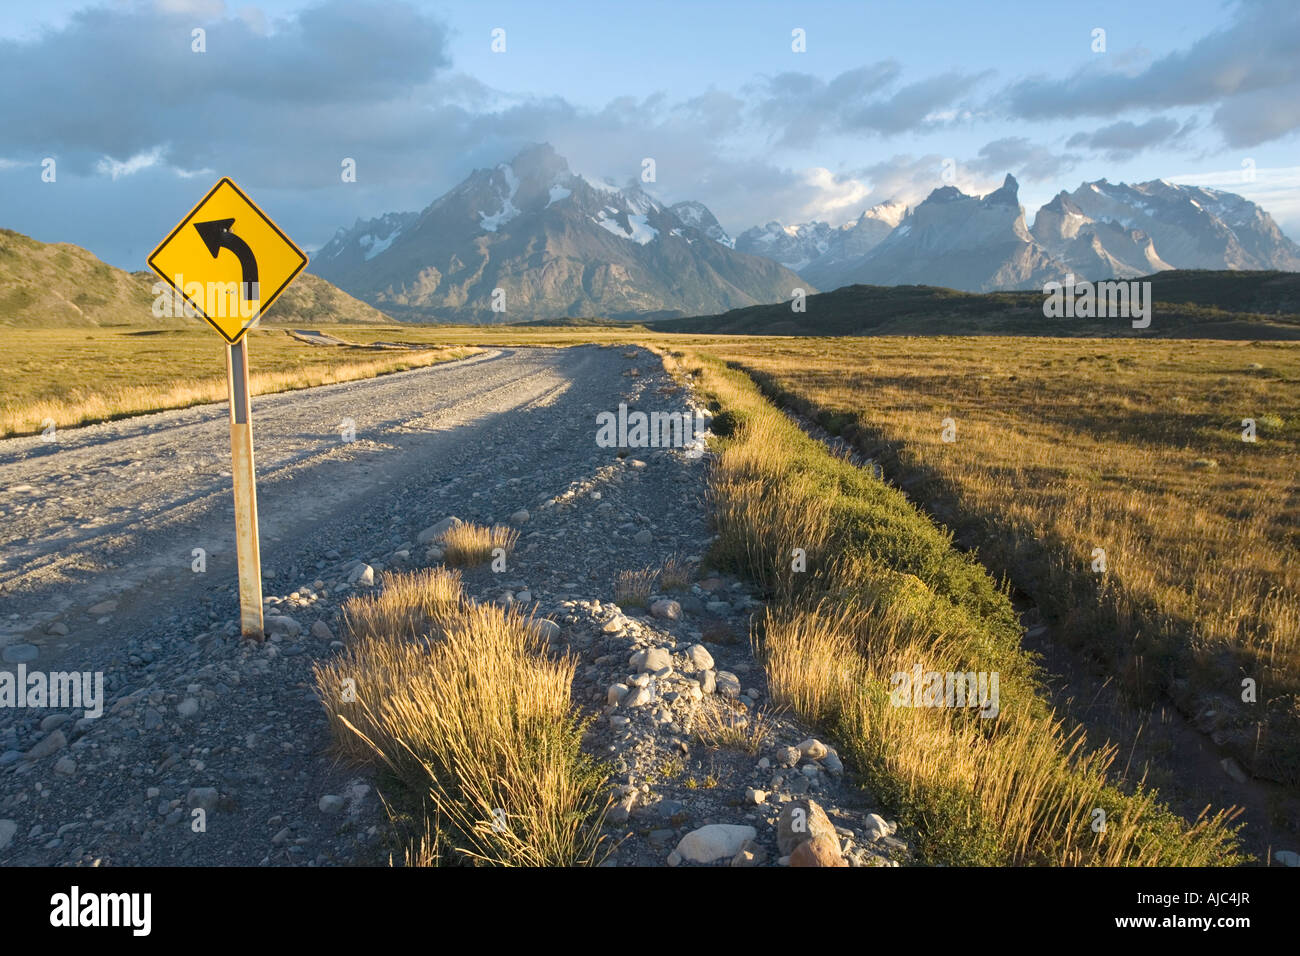 Road Sign on a Dirt Road Stock Photo